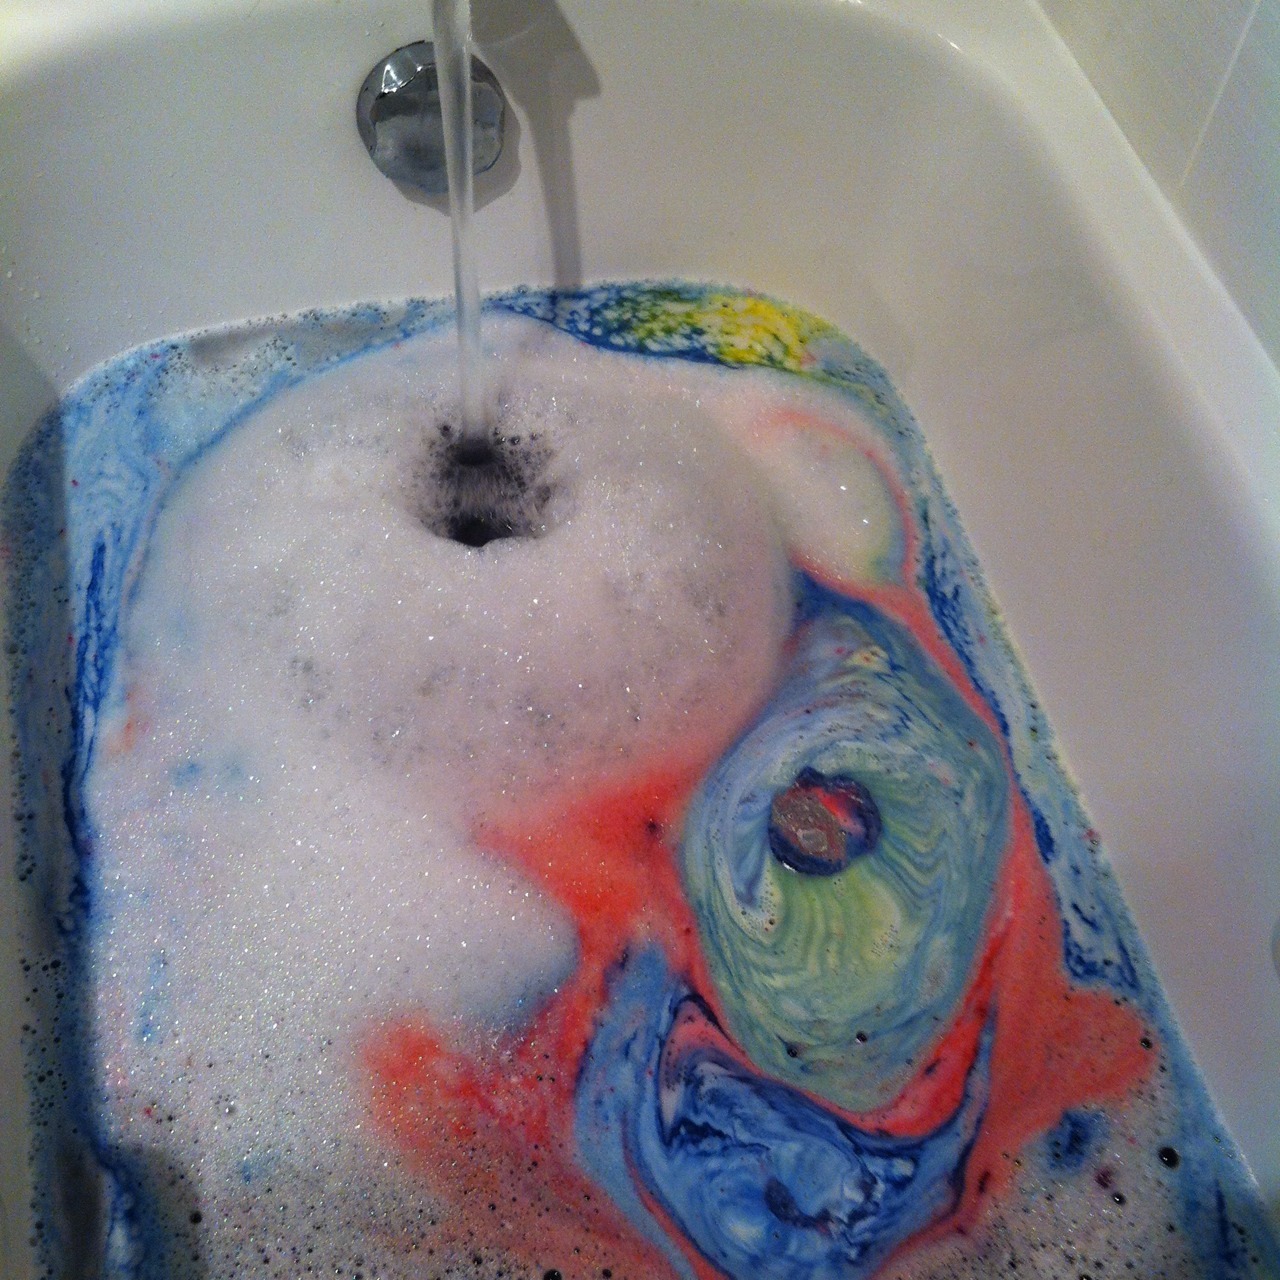 putachild:
“ reoffend:
“ My bath bomb decided to turn my bath into a Van Gough painting
”
How you do that
”